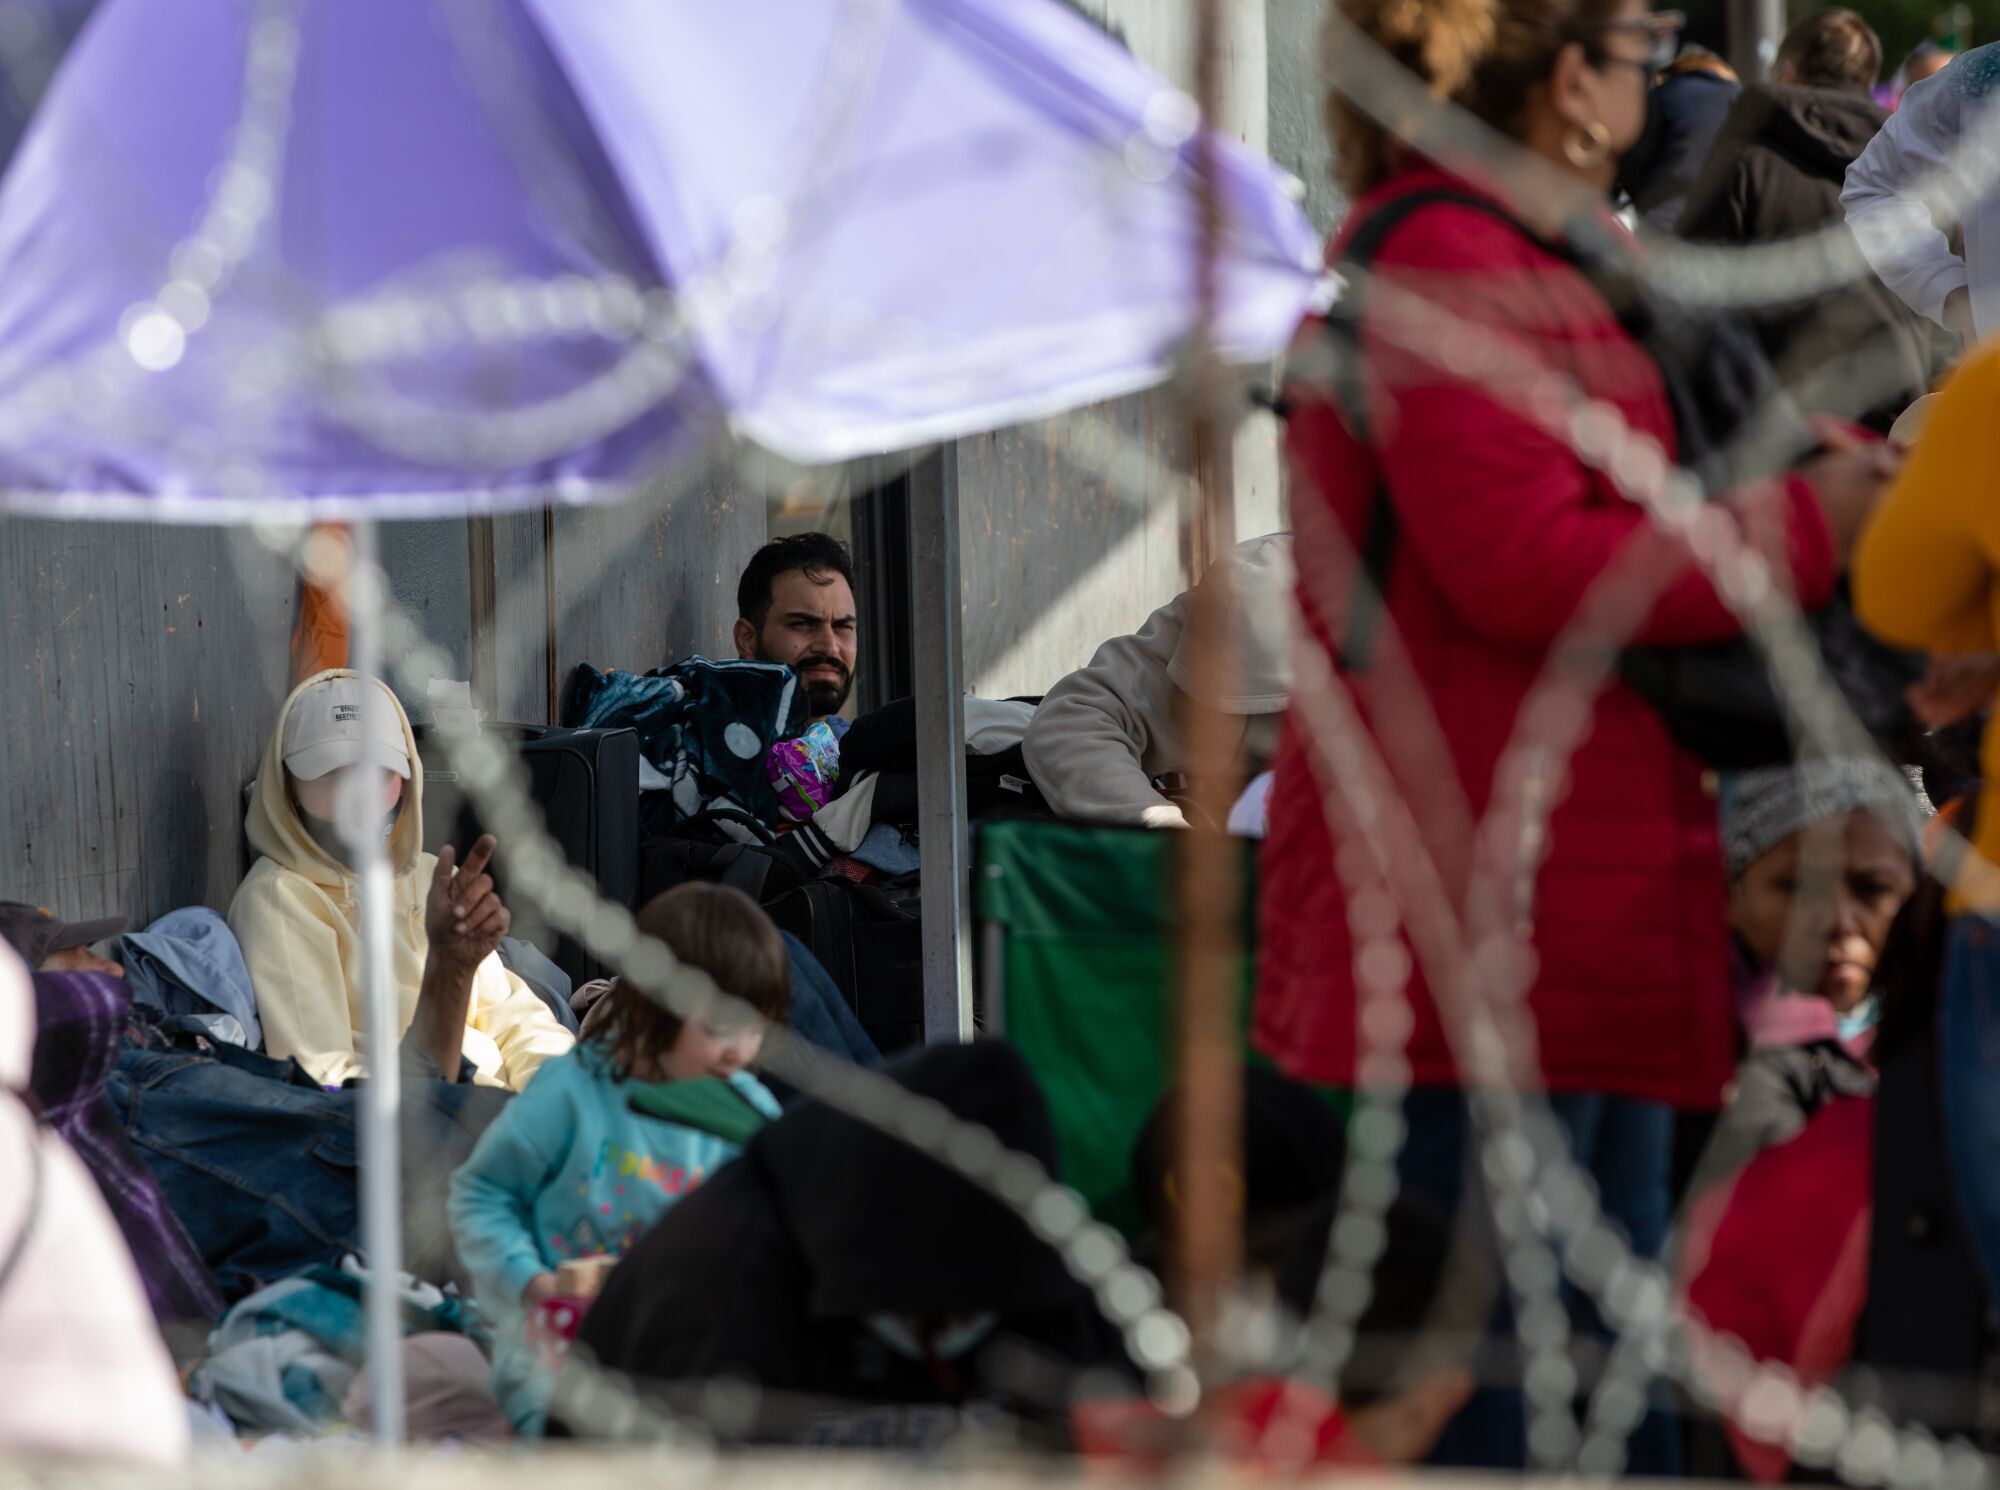 Asylum seekers wait at the San Ysidro Port of Entry hoping to cross into the United States.